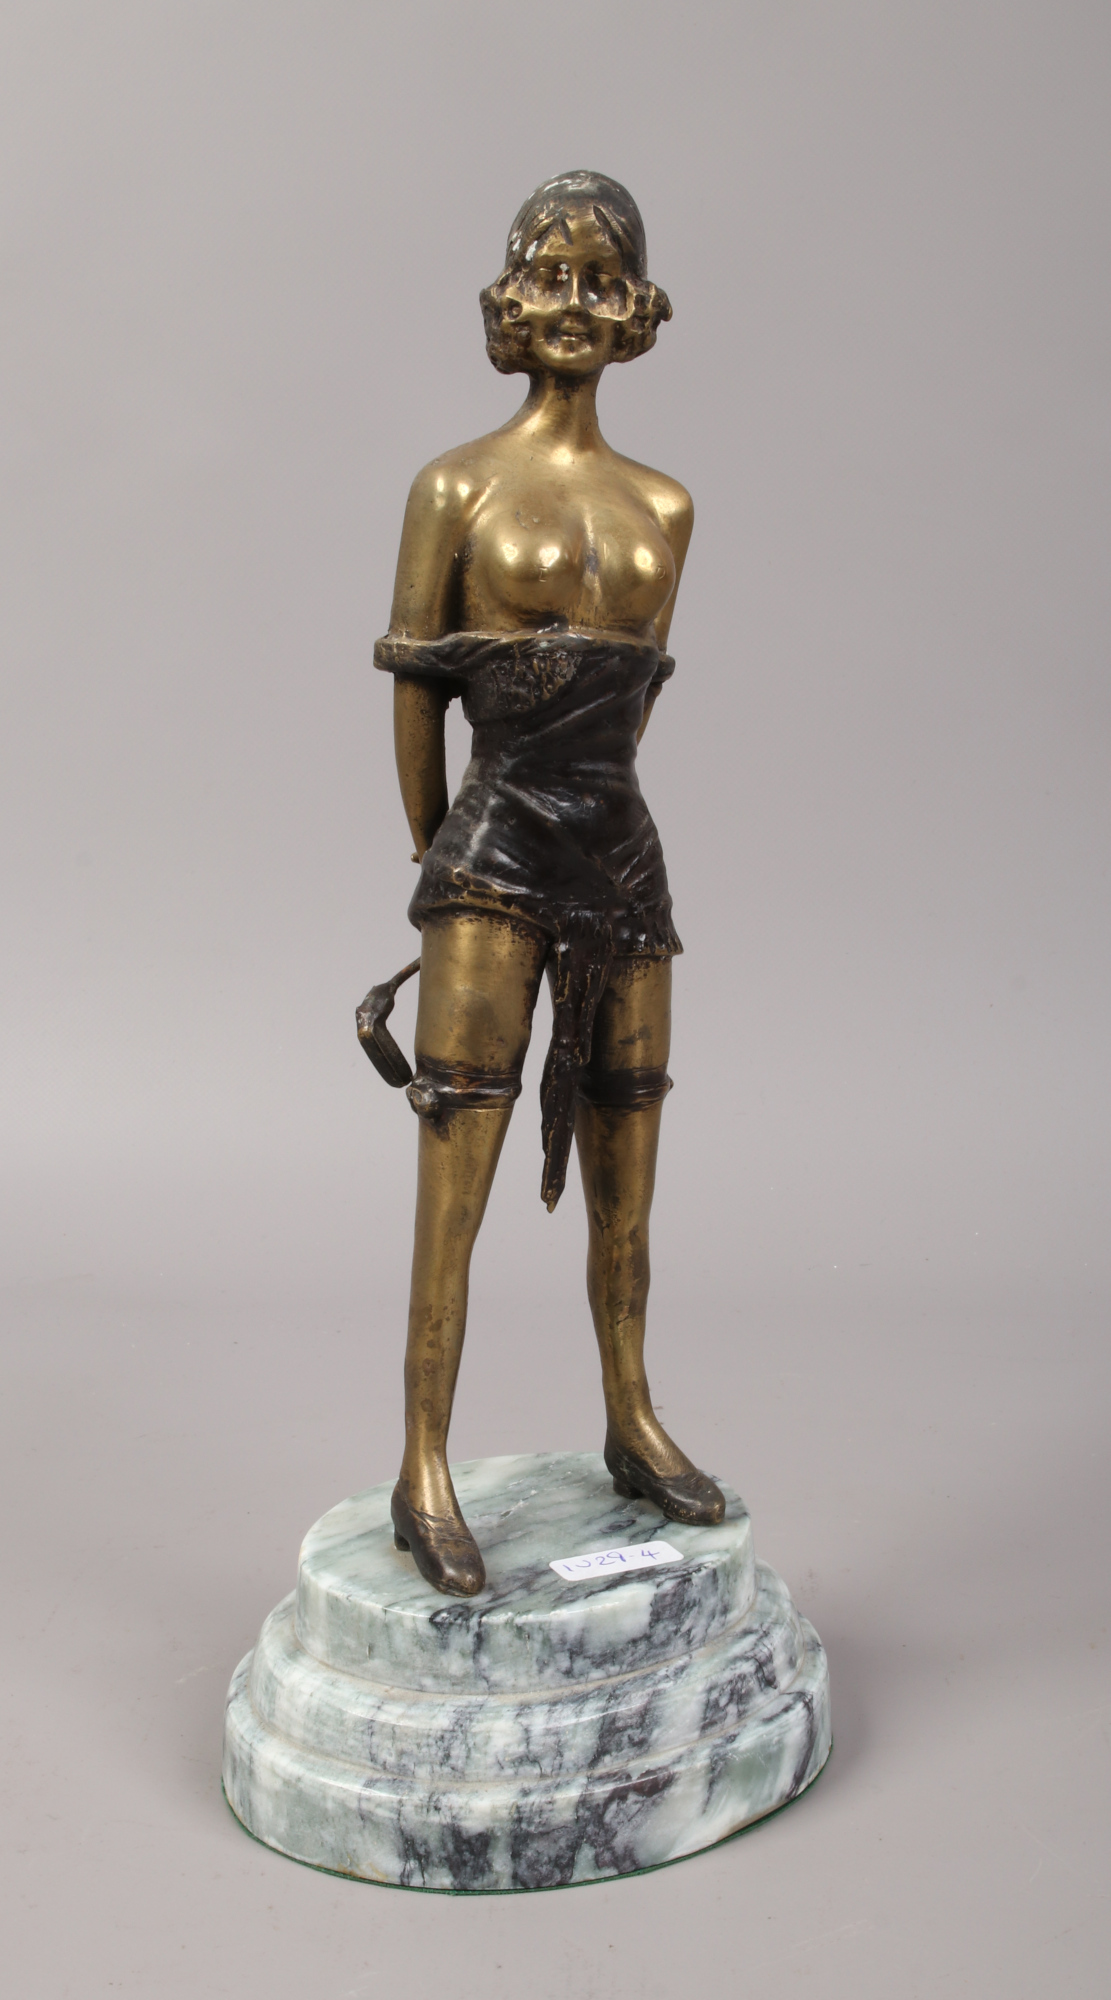 A bronze figurine of scantily clad female raised on a stepped plinth, marked F. Preiss after Bruno